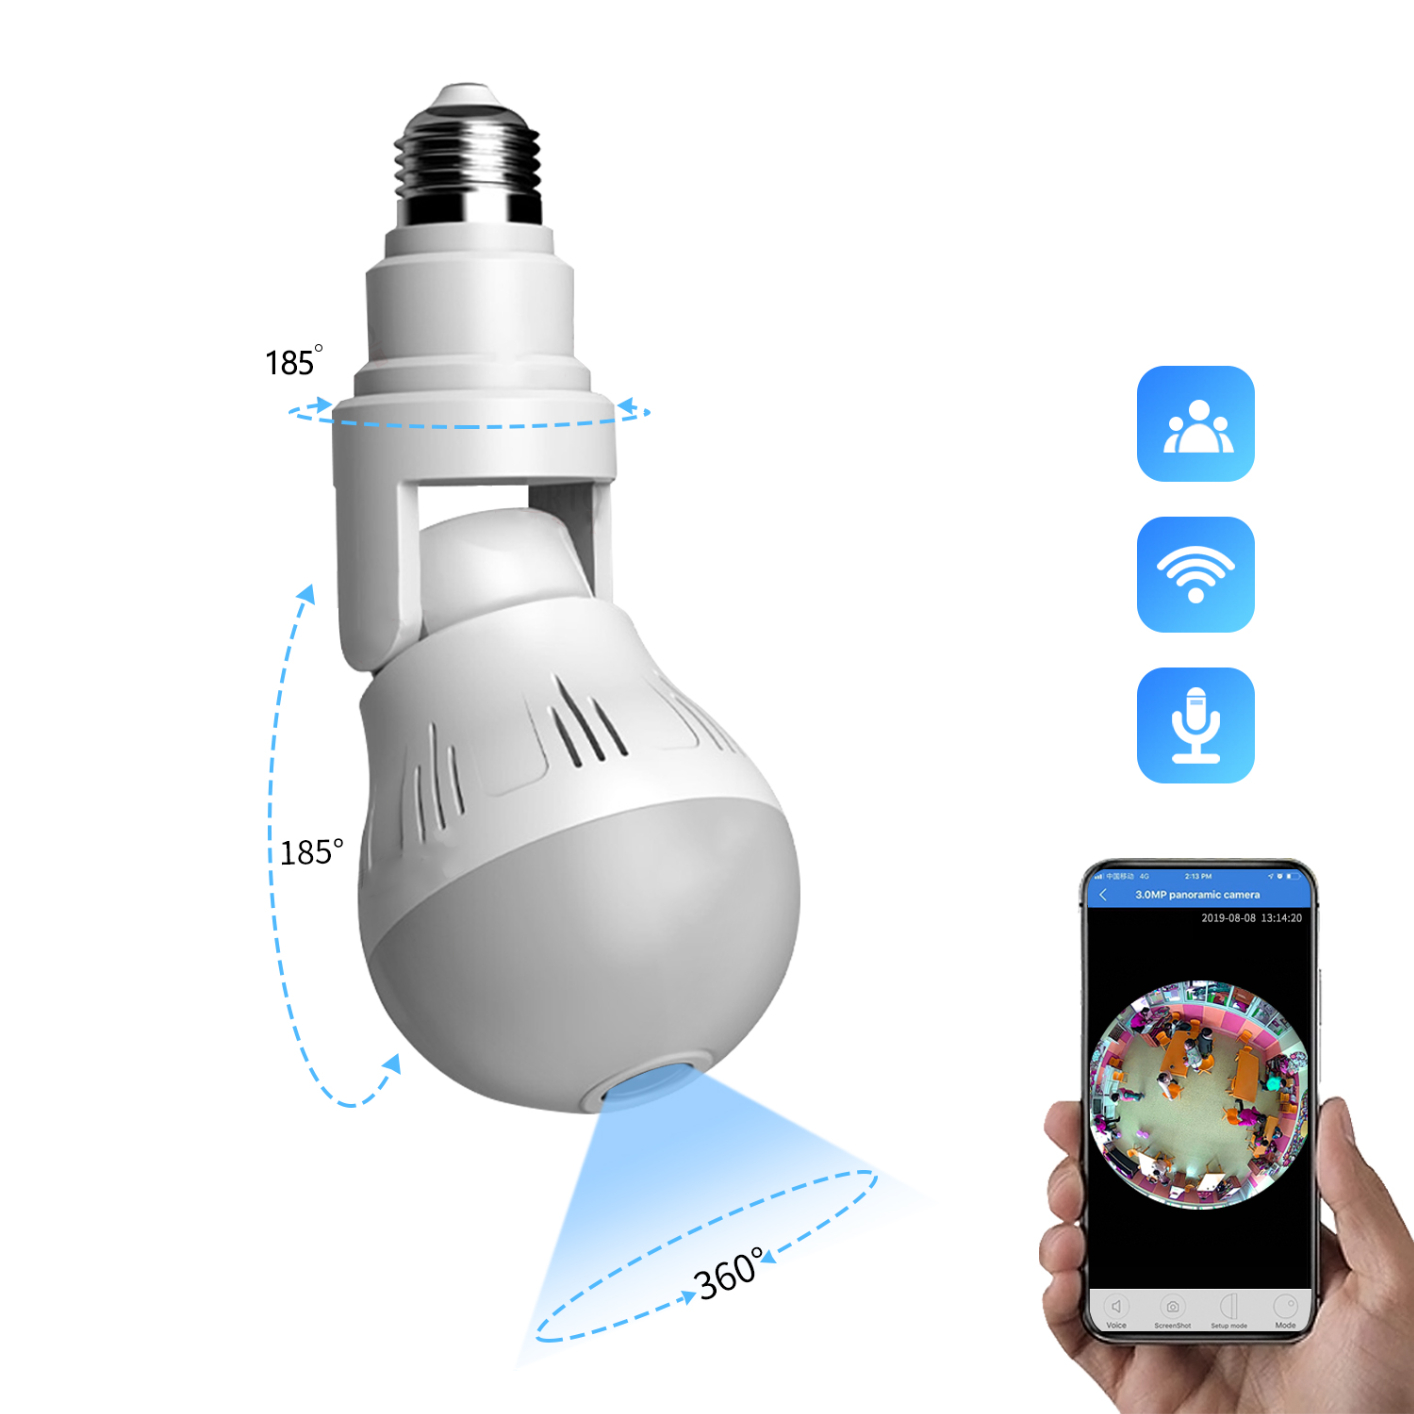 VRT-A6 Light Bulb Camera Wireless 360 Degree Panoramic IP Camera-2MP LED Light Camera Lamp-Remote Floodlight Infrared Night Vision Motion Detection for Baby/Elder/Pet/Nanny Monitor Wireless Camera 2.4GHz